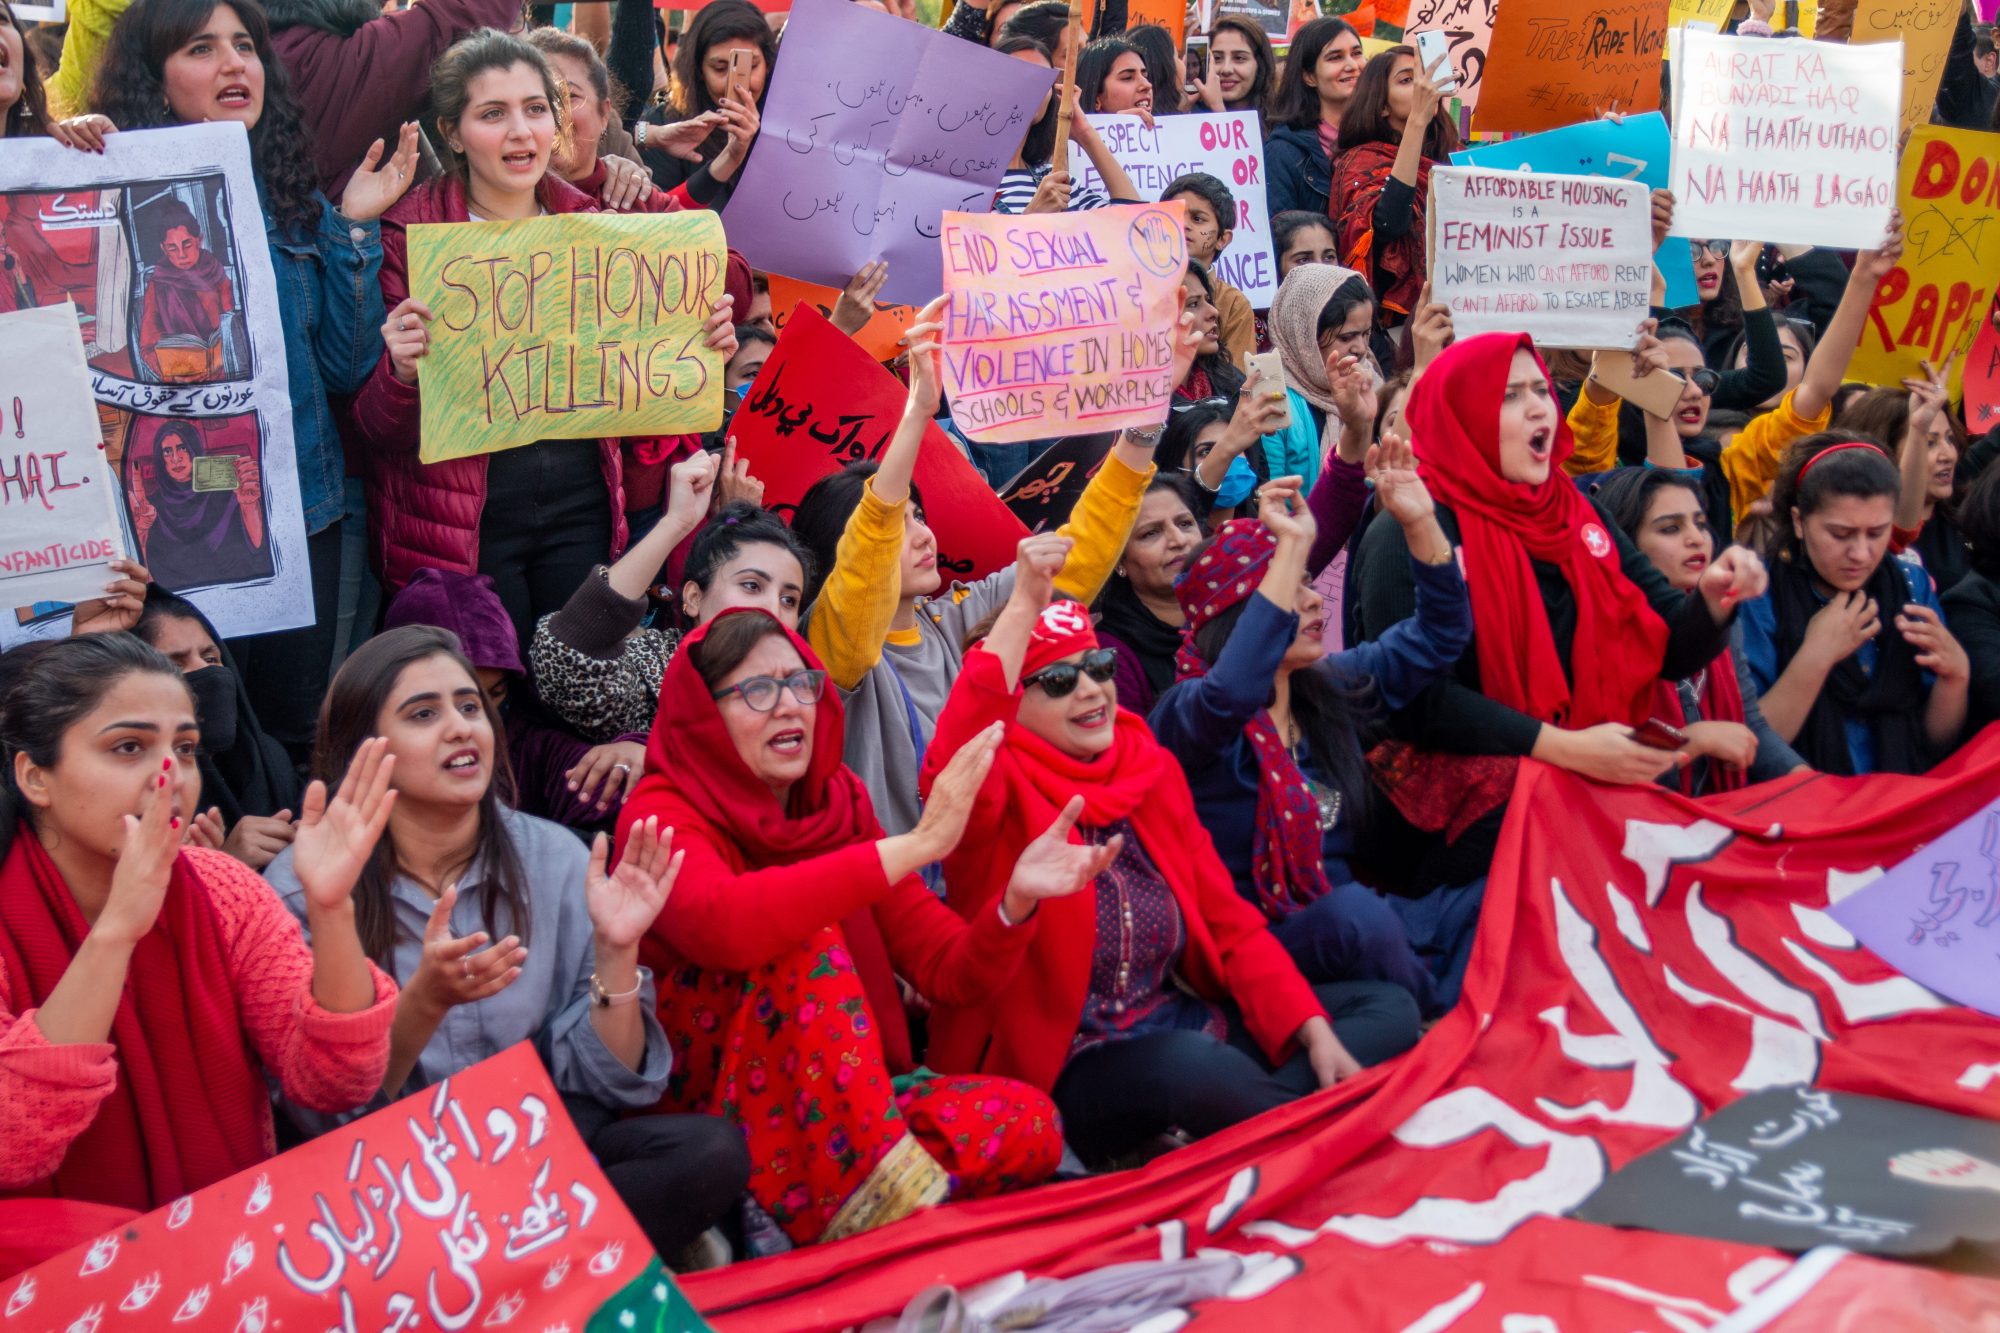 Pakistan's International Women's Day march: Inclusive or exclusive? | South  Asia@LSE